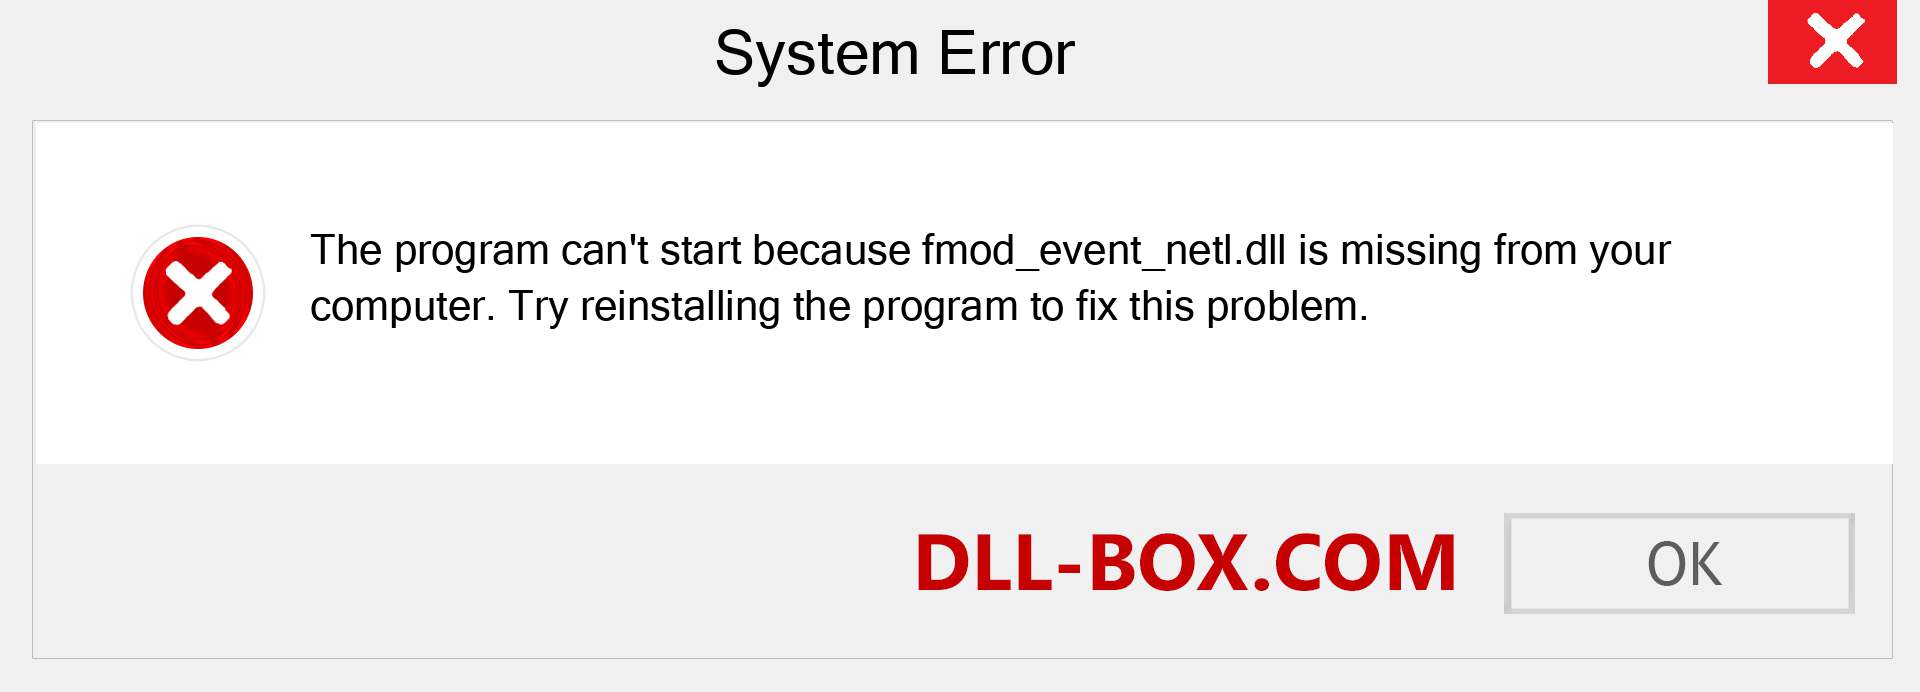  fmod_event_netl.dll file is missing?. Download for Windows 7, 8, 10 - Fix  fmod_event_netl dll Missing Error on Windows, photos, images